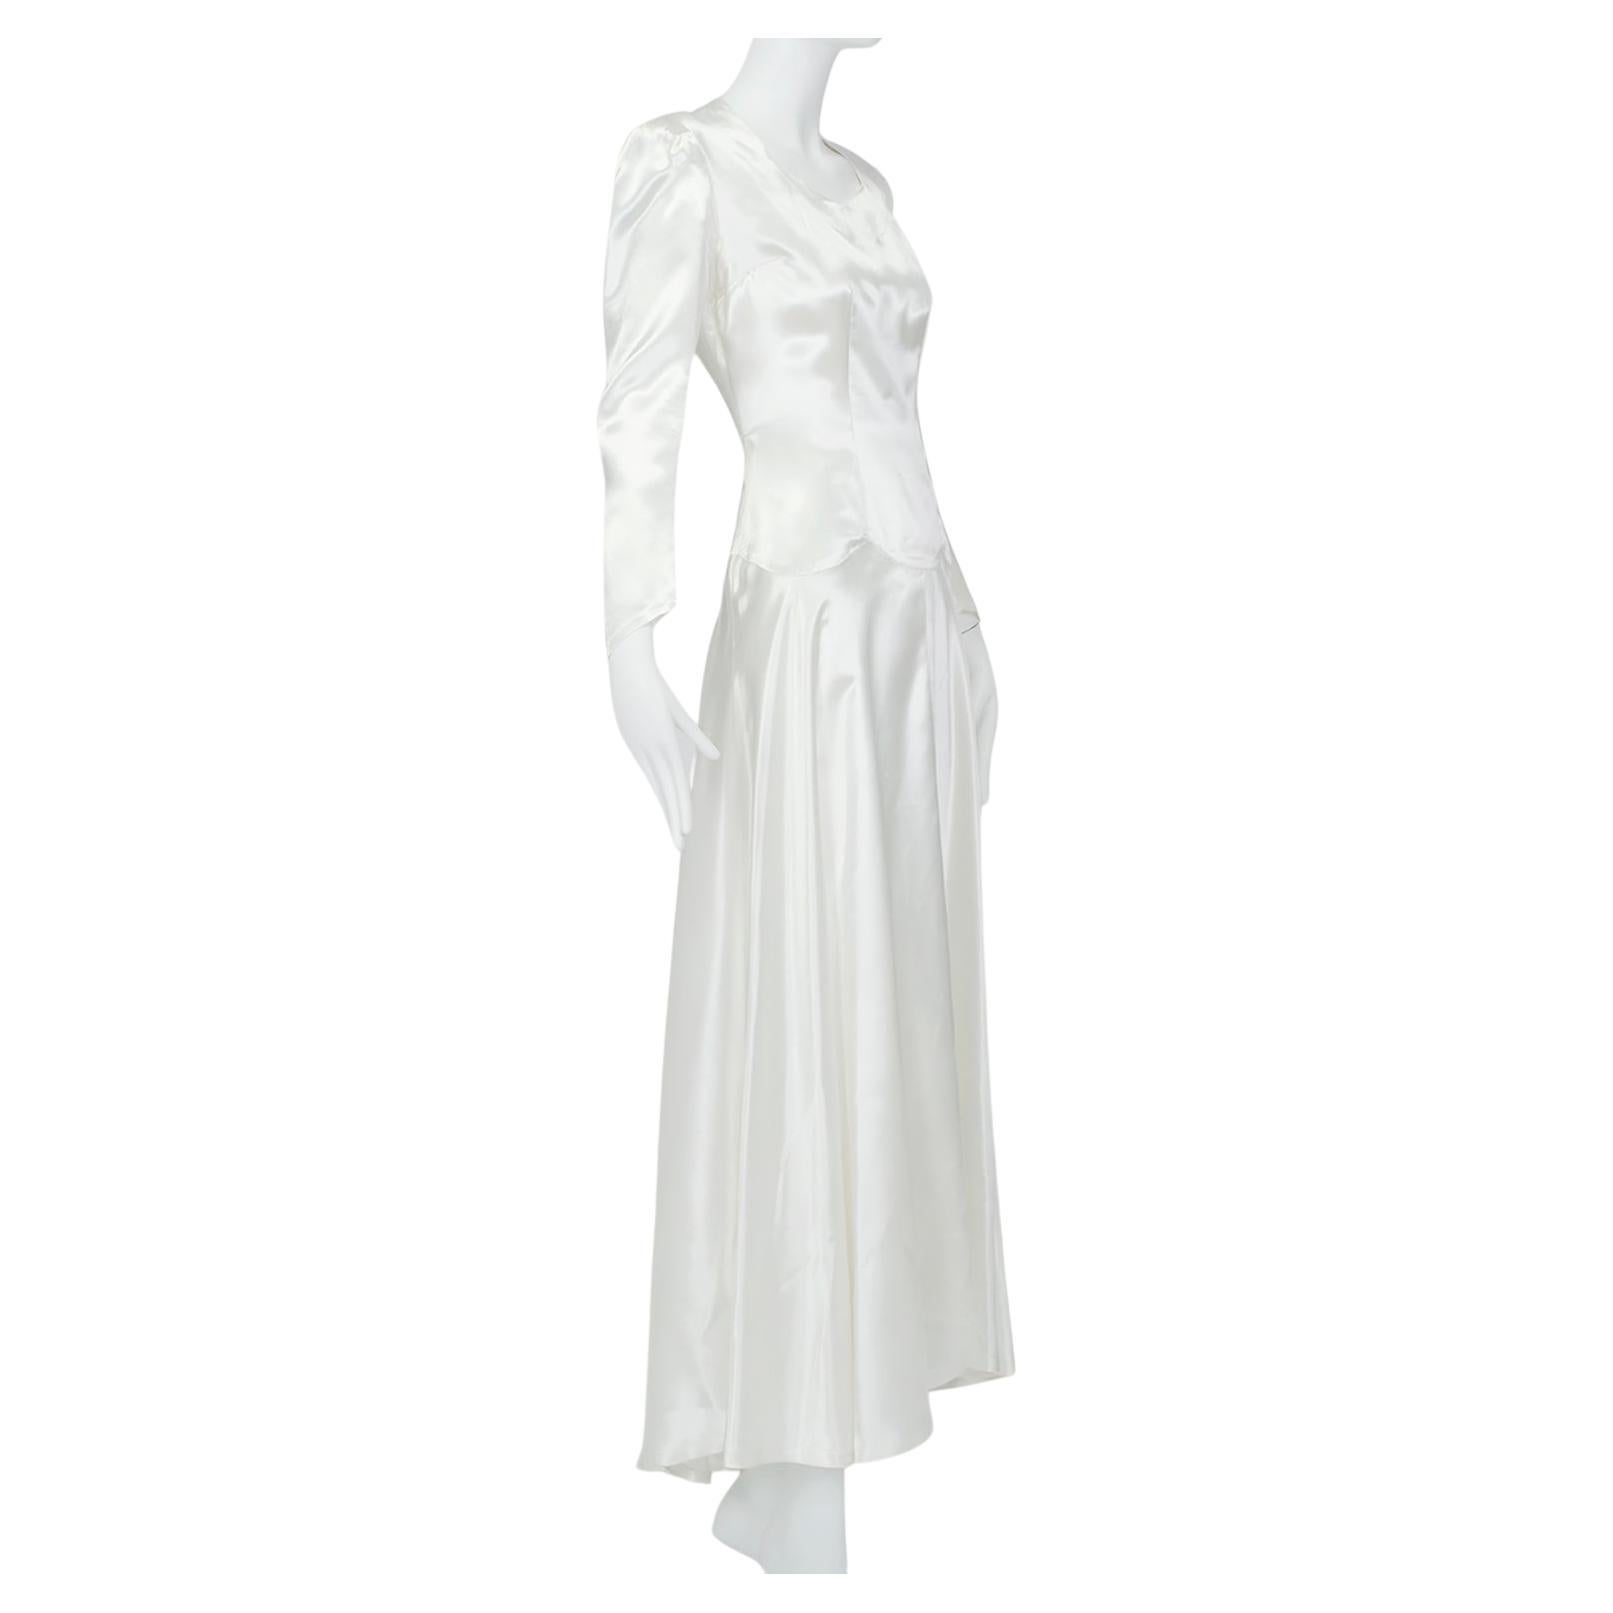 Minimalist Ivory Lacquered Satin Ankle Length Sweetheart Wedding Gown – M, 1940s For Sale